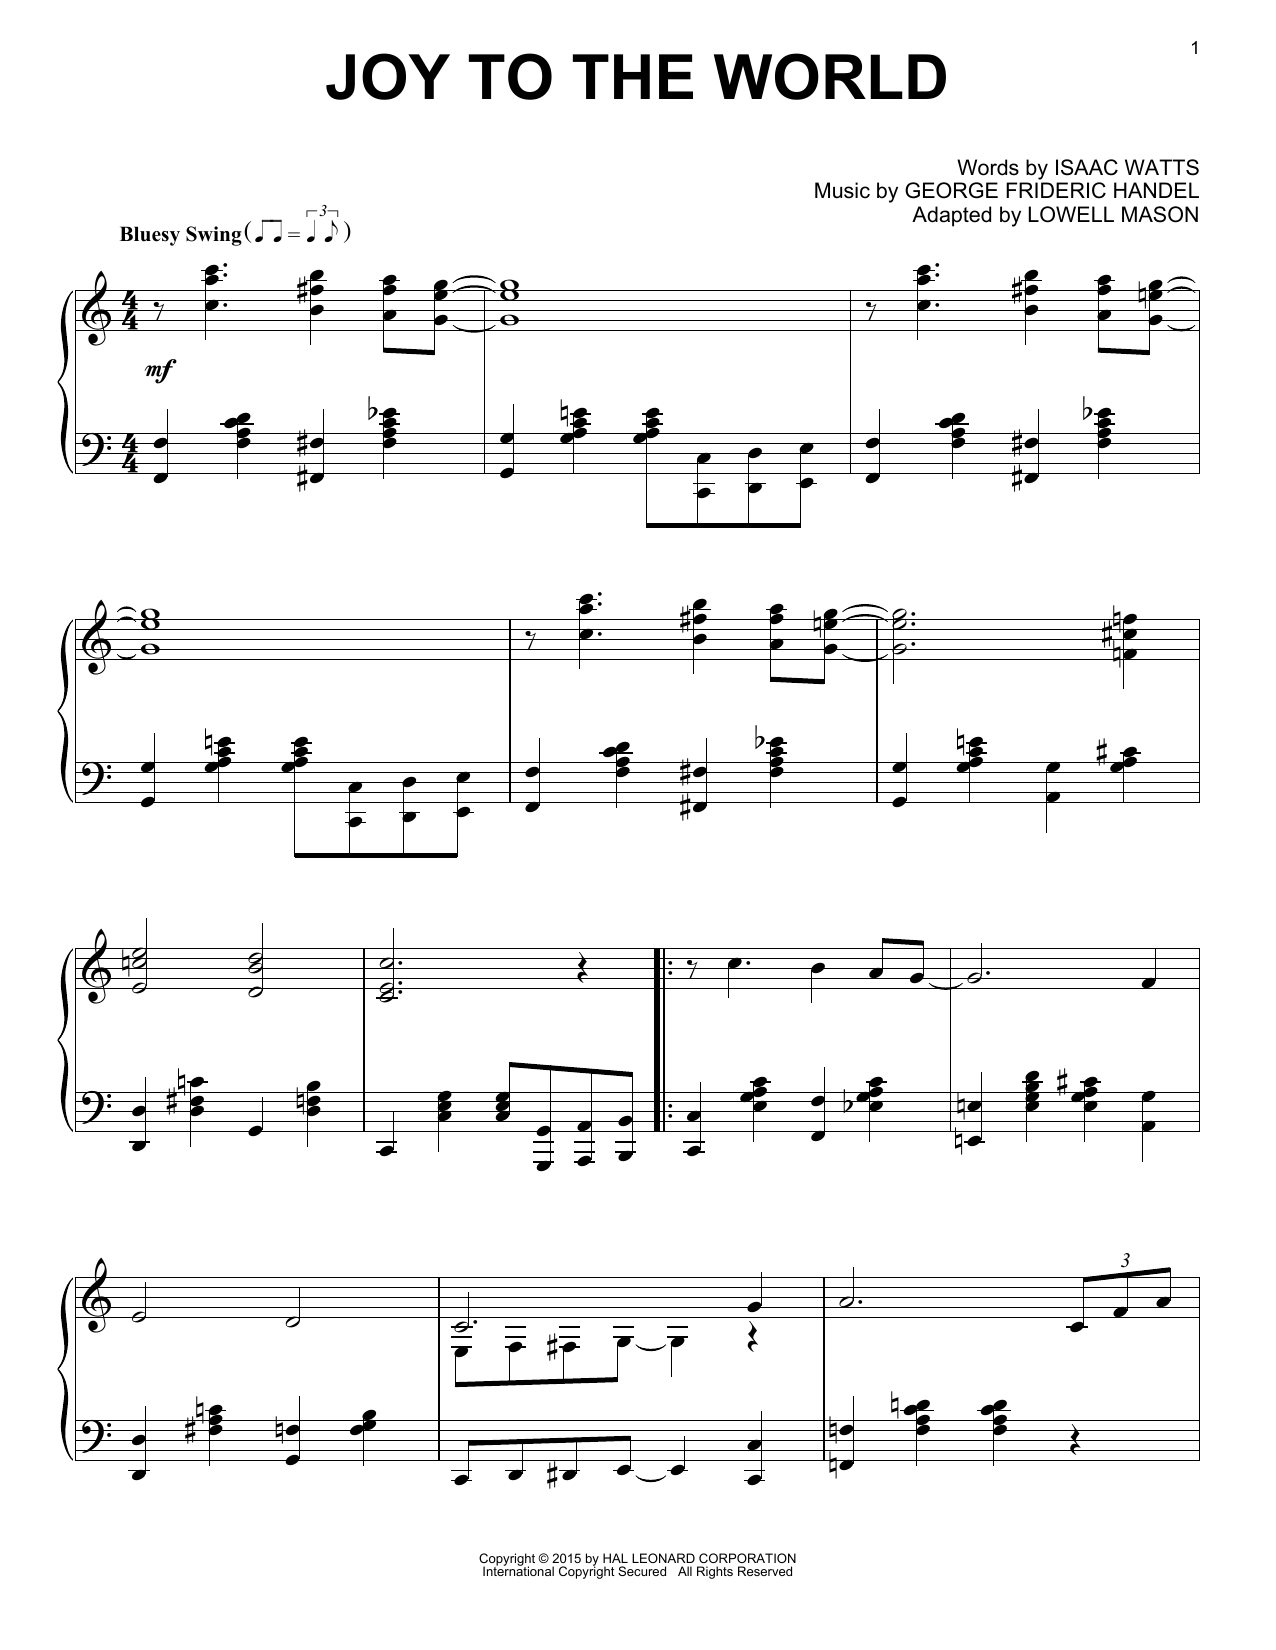 George Frideric Handel Joy To The World sheet music notes and chords. Download Printable PDF.